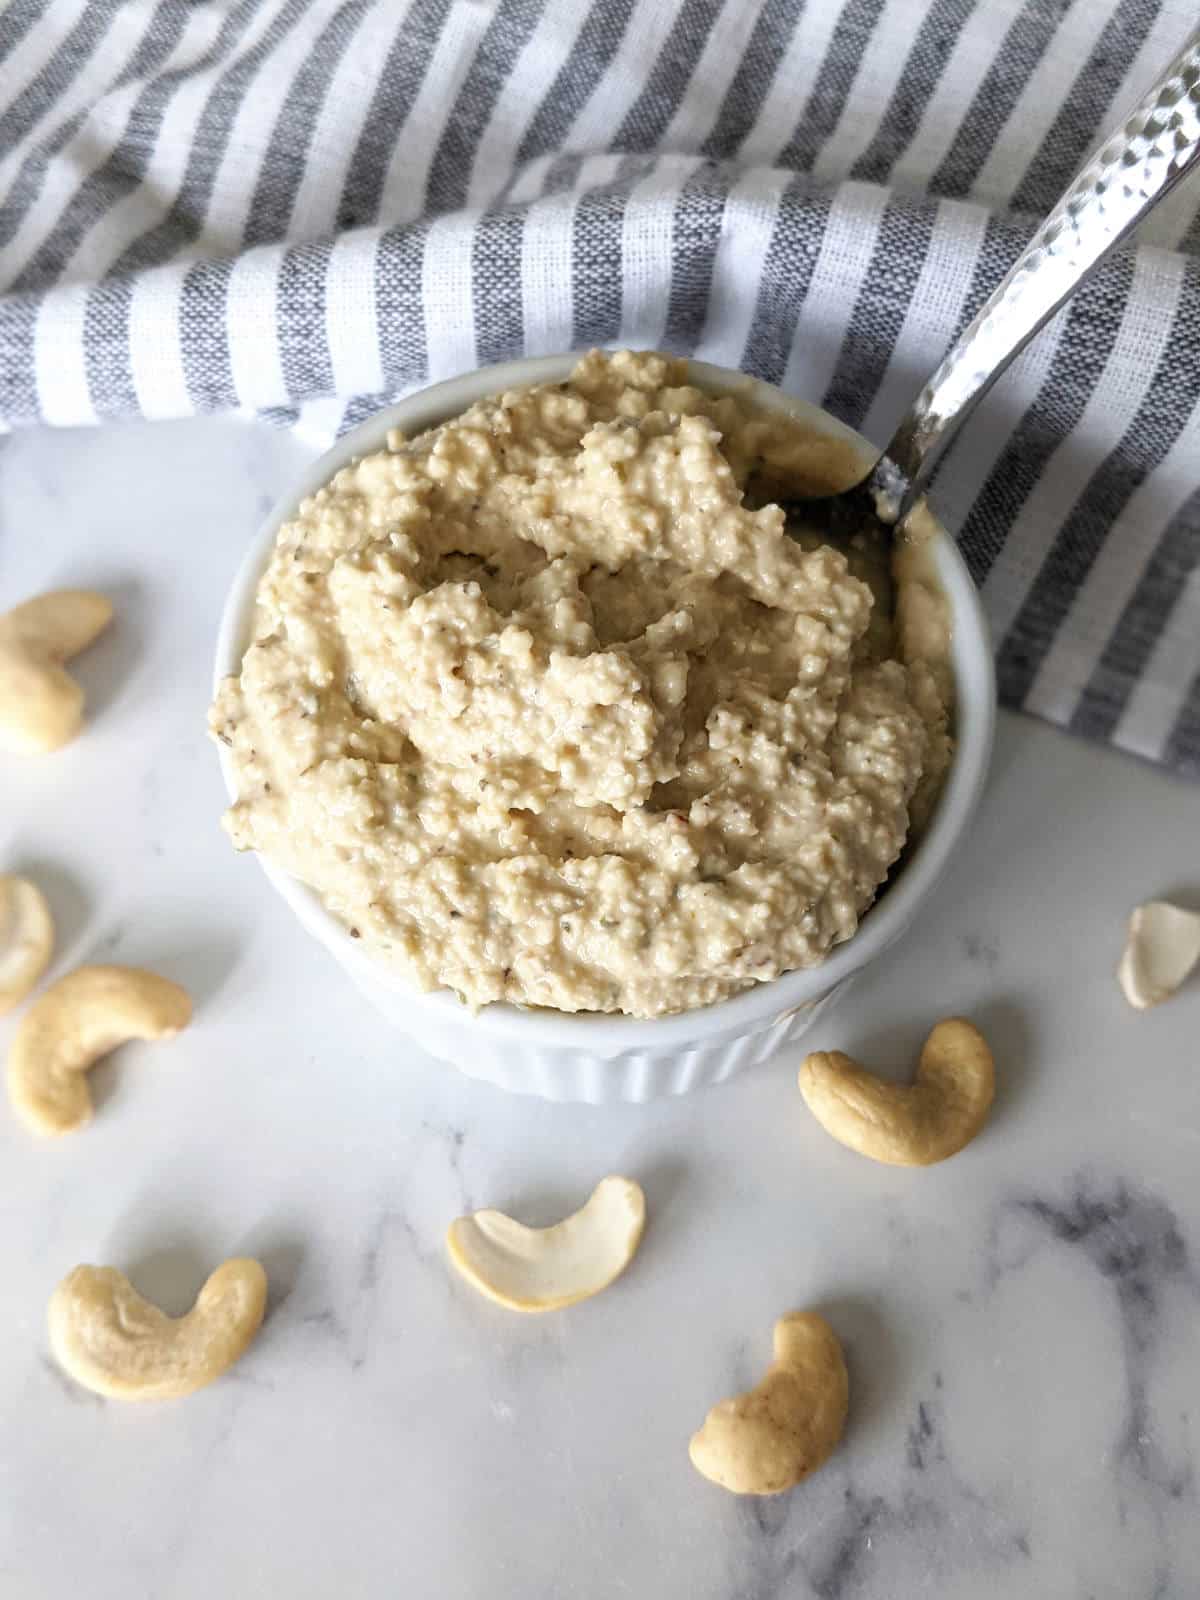 Vegan cashew ricotta in small bowl with spoon and raw cashews next to it.